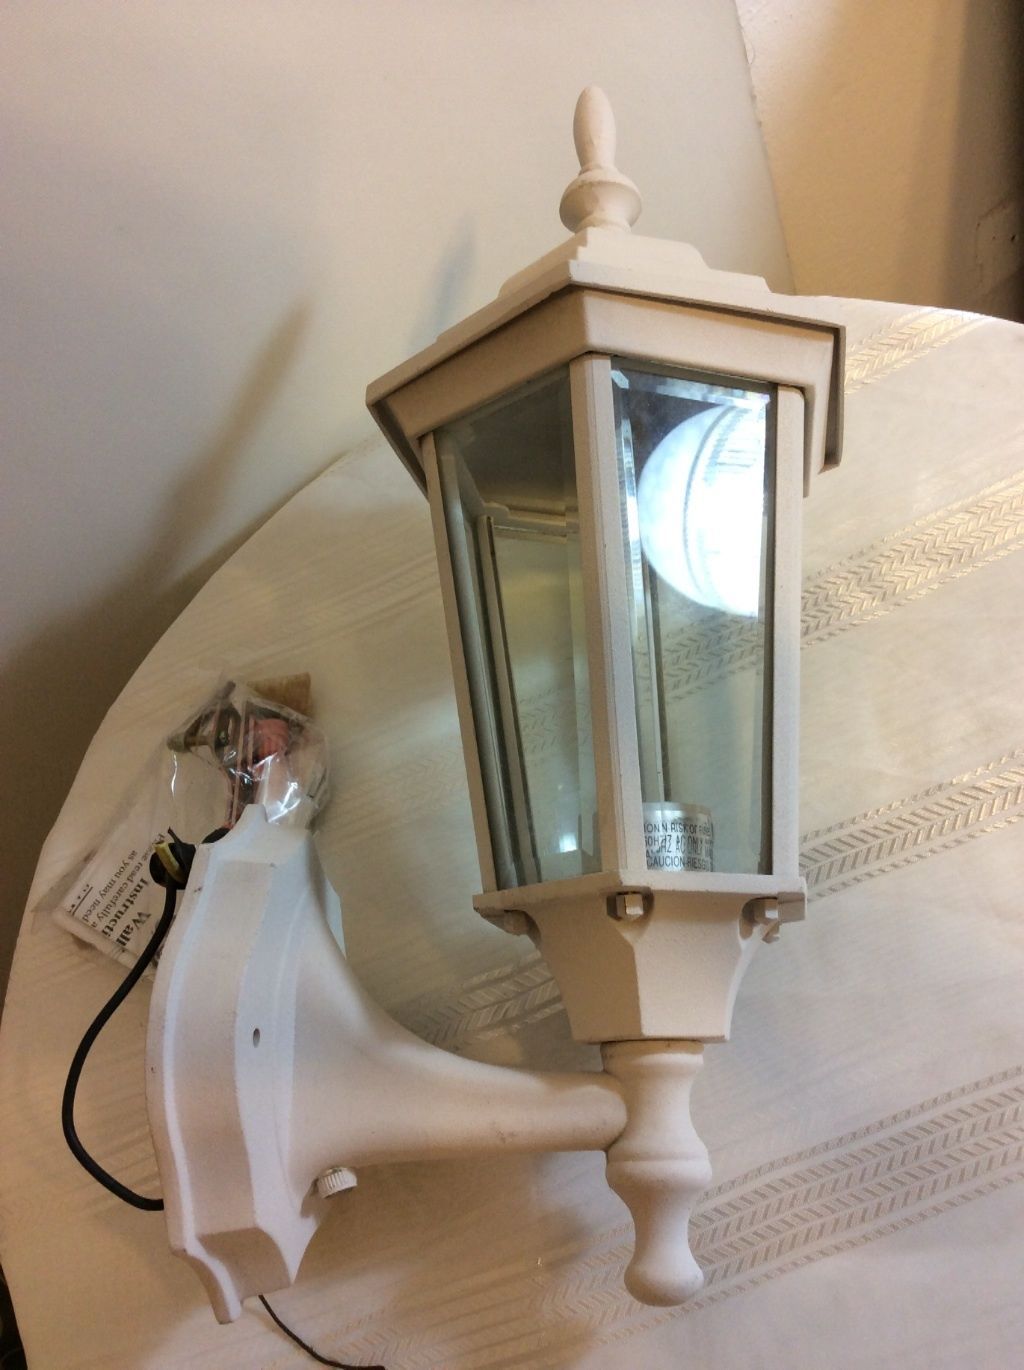 Wall Mount Exterior Lamp,White,Hampton Bay,Beveled Glass,One Bulb Needed - $19.98